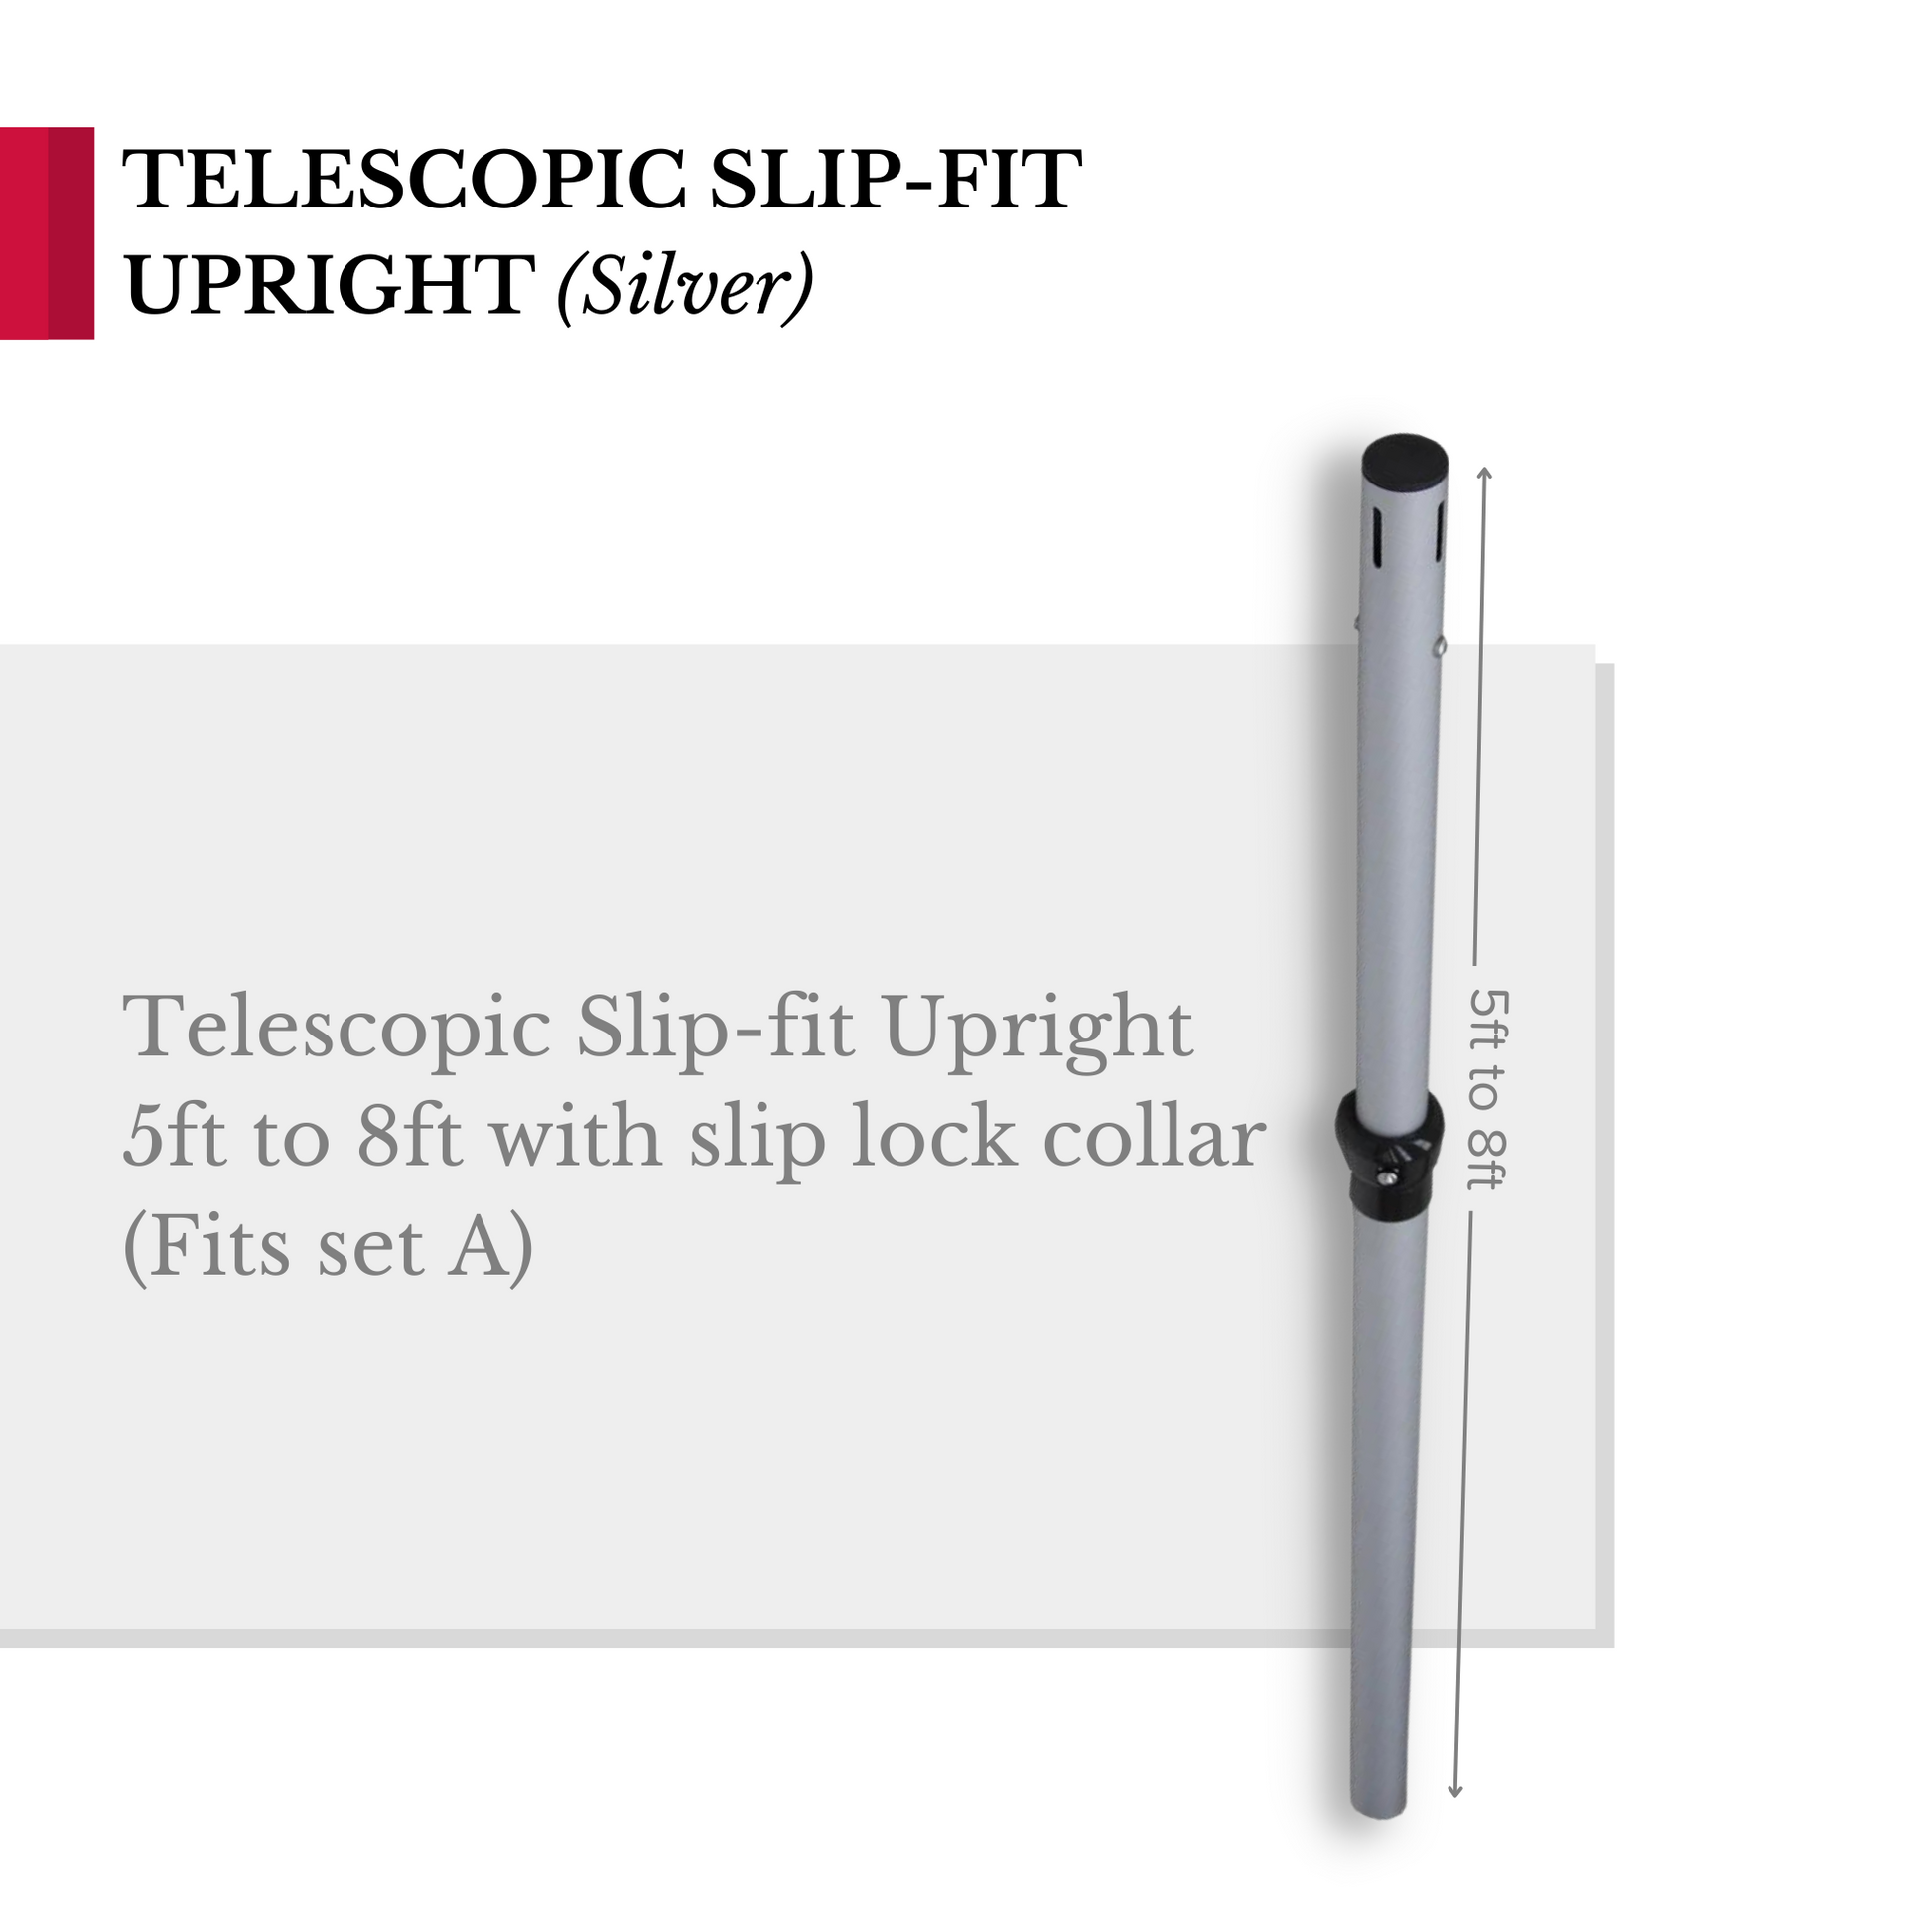 Telescopic Slip-fit Upright 5ft to 8ft with slip lock collar (Fits set A)